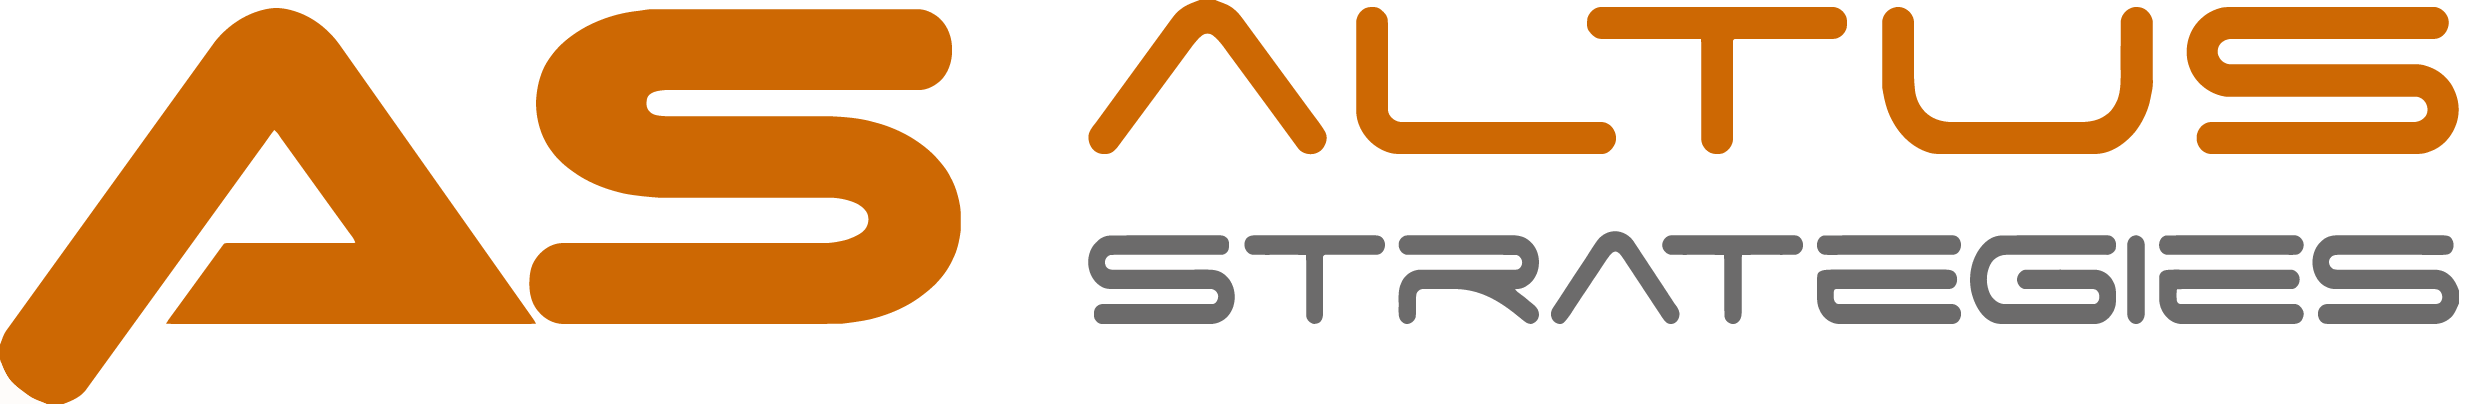 Altus Strategies Plc, Tuesday, March 2, 2021, Press release picture